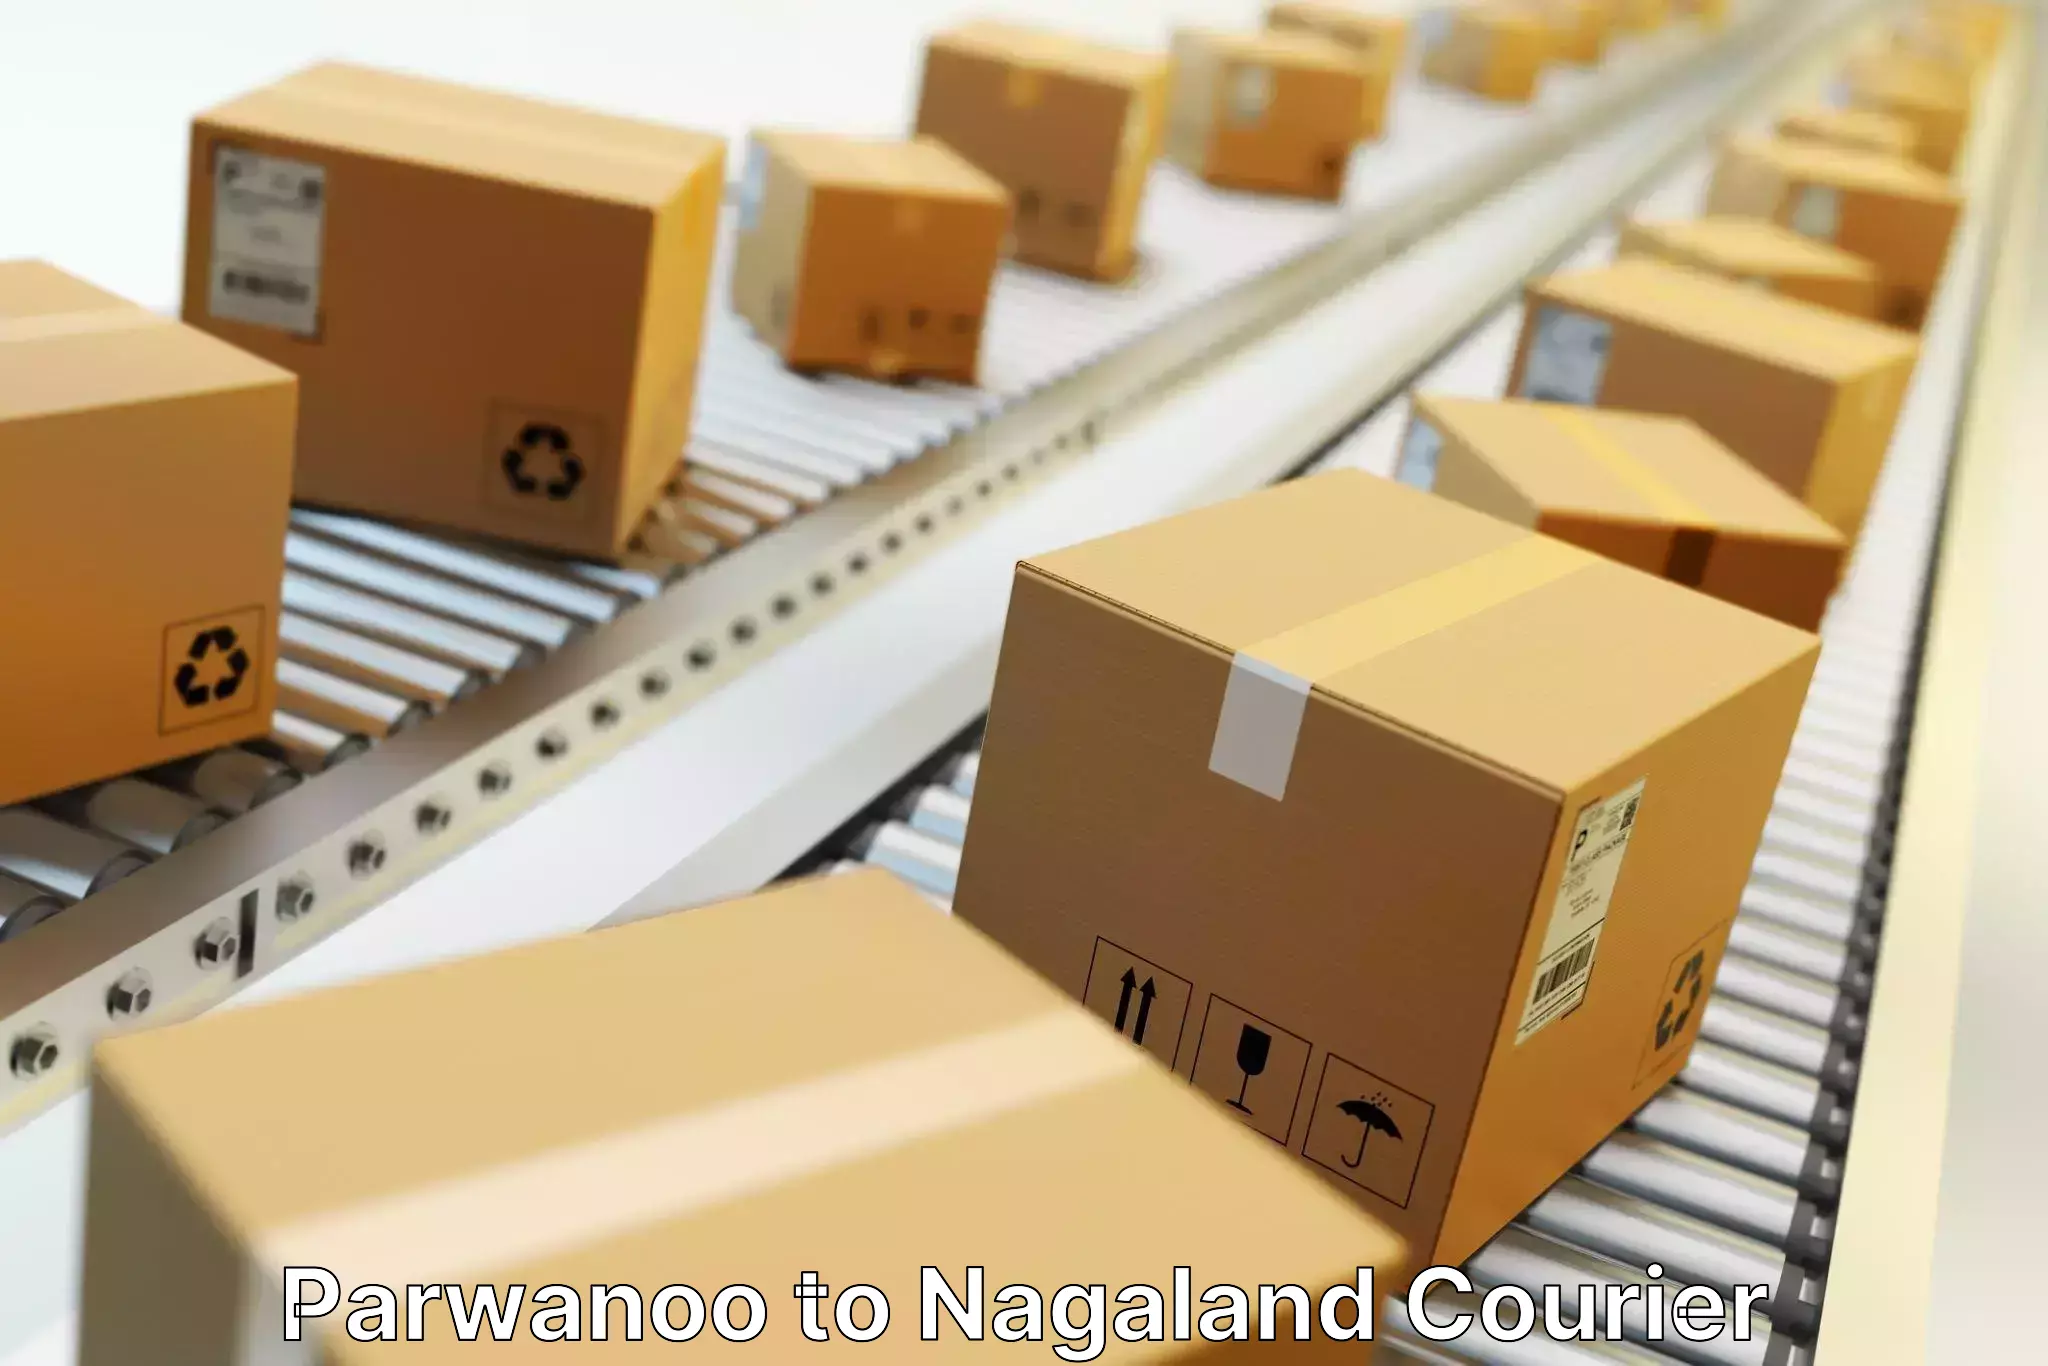 Same-day delivery options Parwanoo to NIT Nagaland